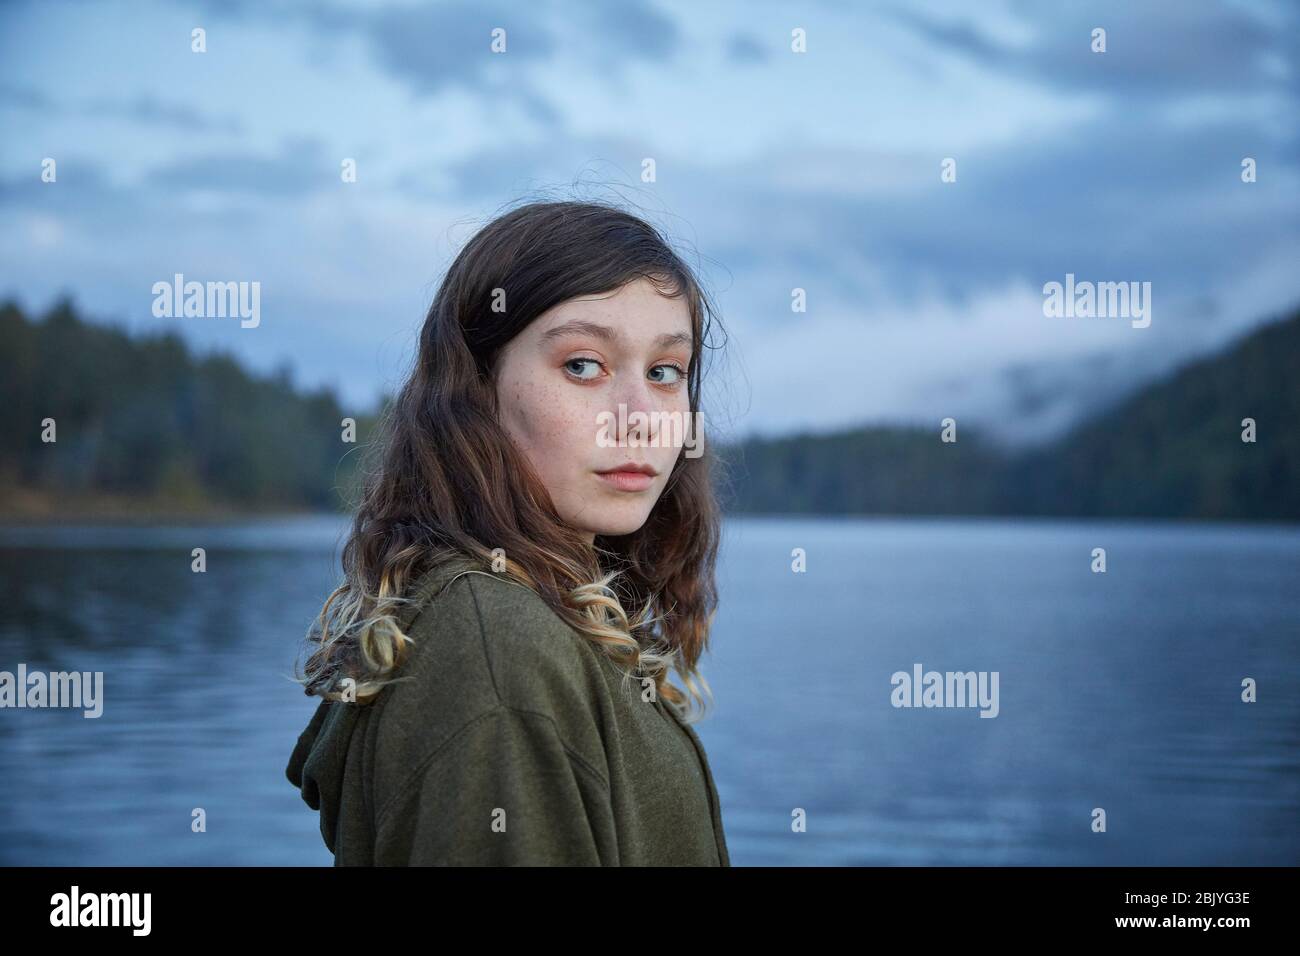 Portrait of girl by lake Stock Photo